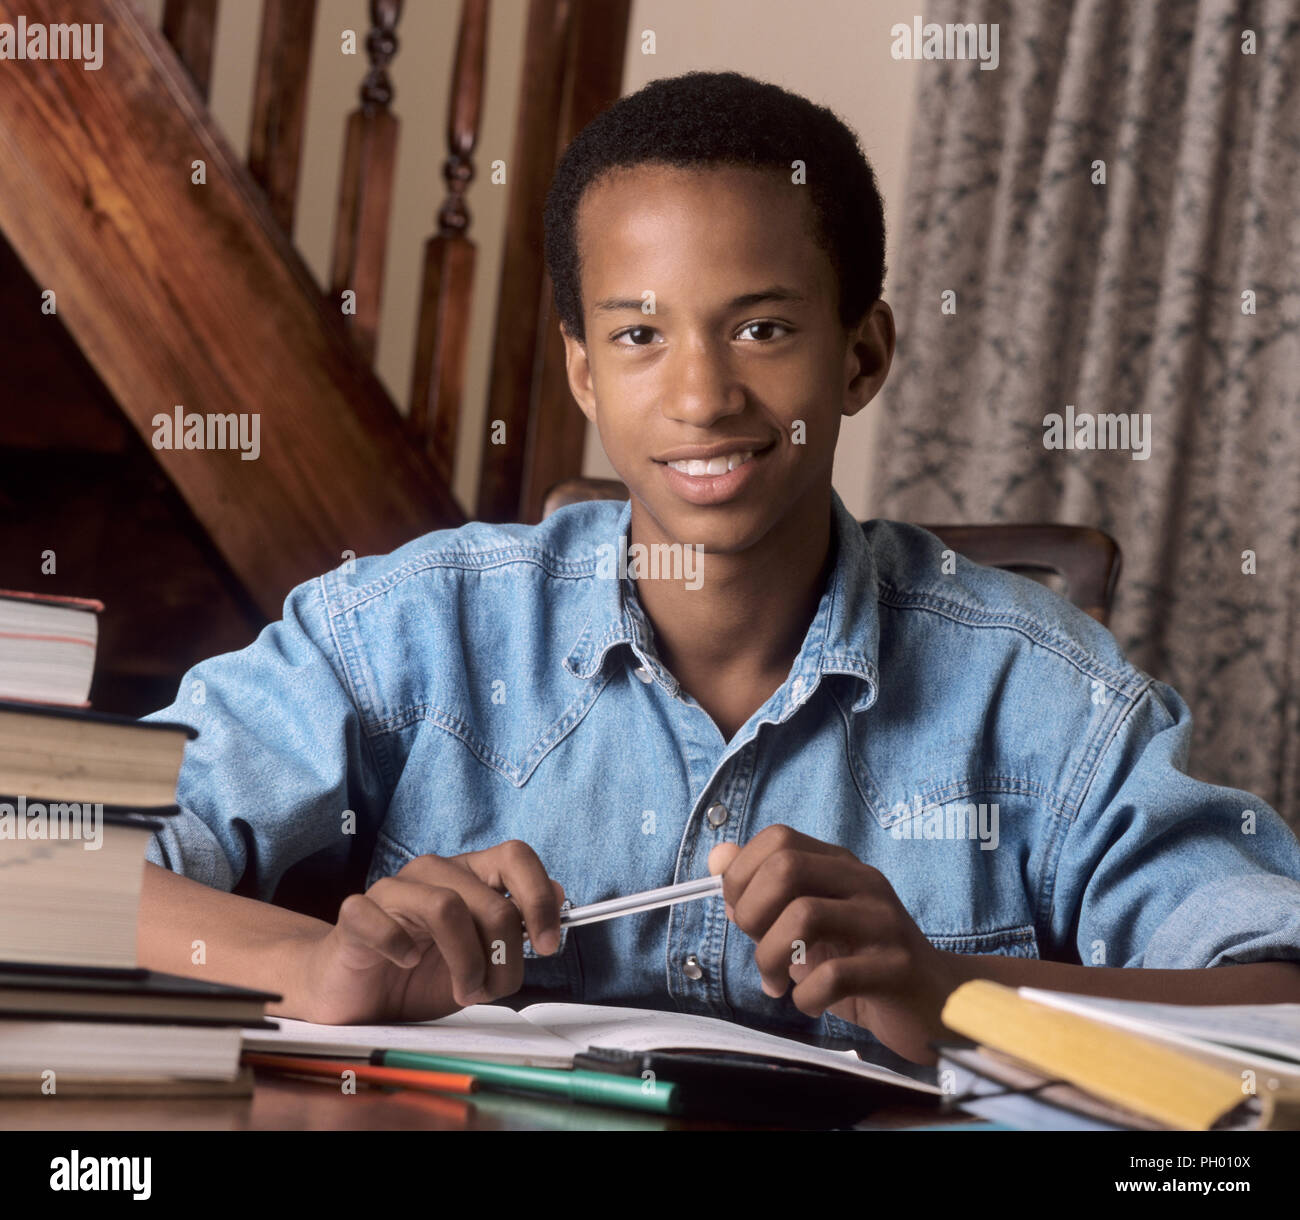 Homework study work & teenage 15-17 yrs black British African Caribbean schoolboy handsome smiling confident doing his homework exam revision at home Stock Photo